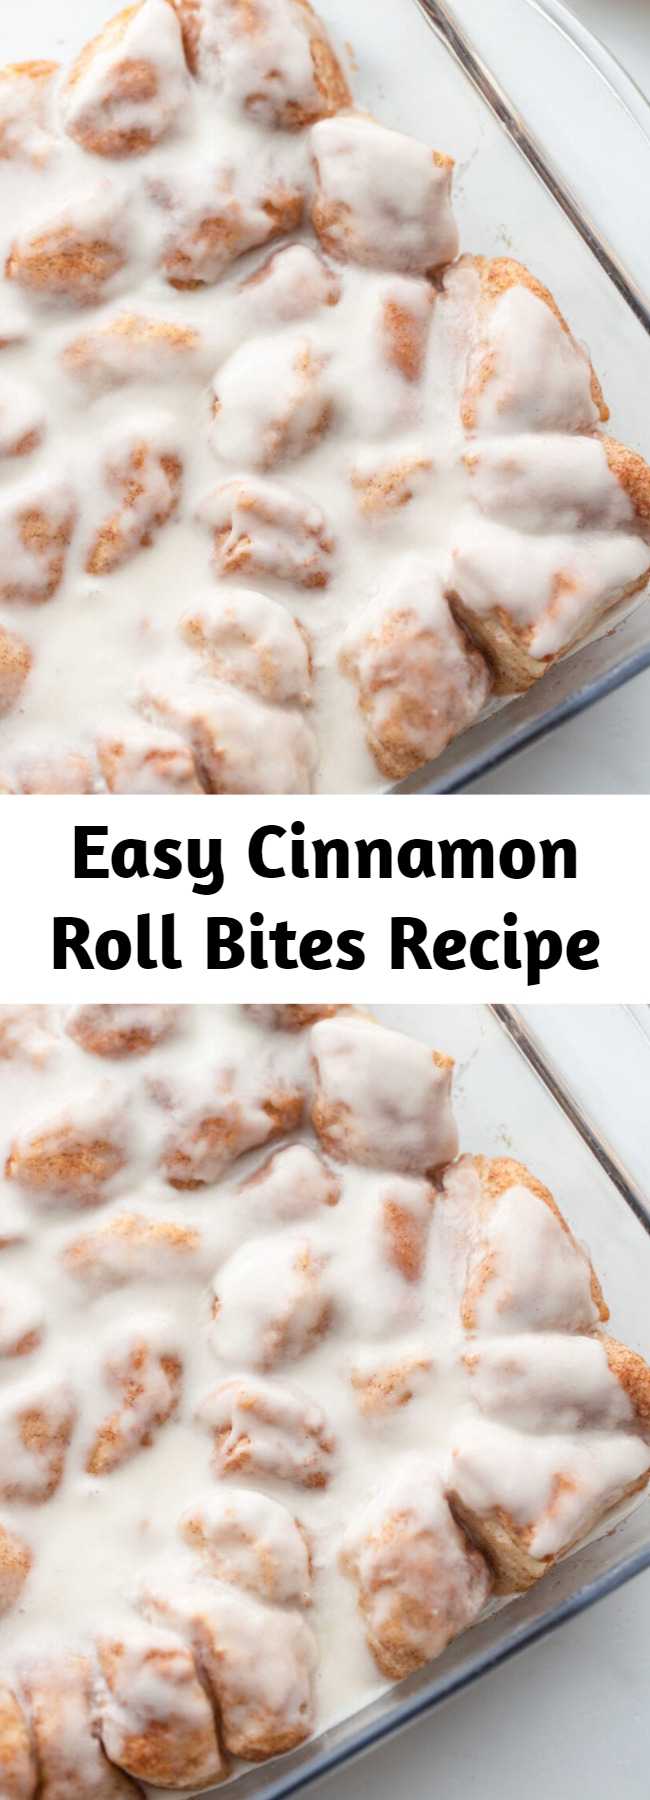 Easy Cinnamon Roll Bites Recipe - Ooey, gooey Cinnamon Roll Bites give you all the great taste of a cinnamon roll without all the work! They take no time at all to make and will vanish quicker than a blink of an eye.